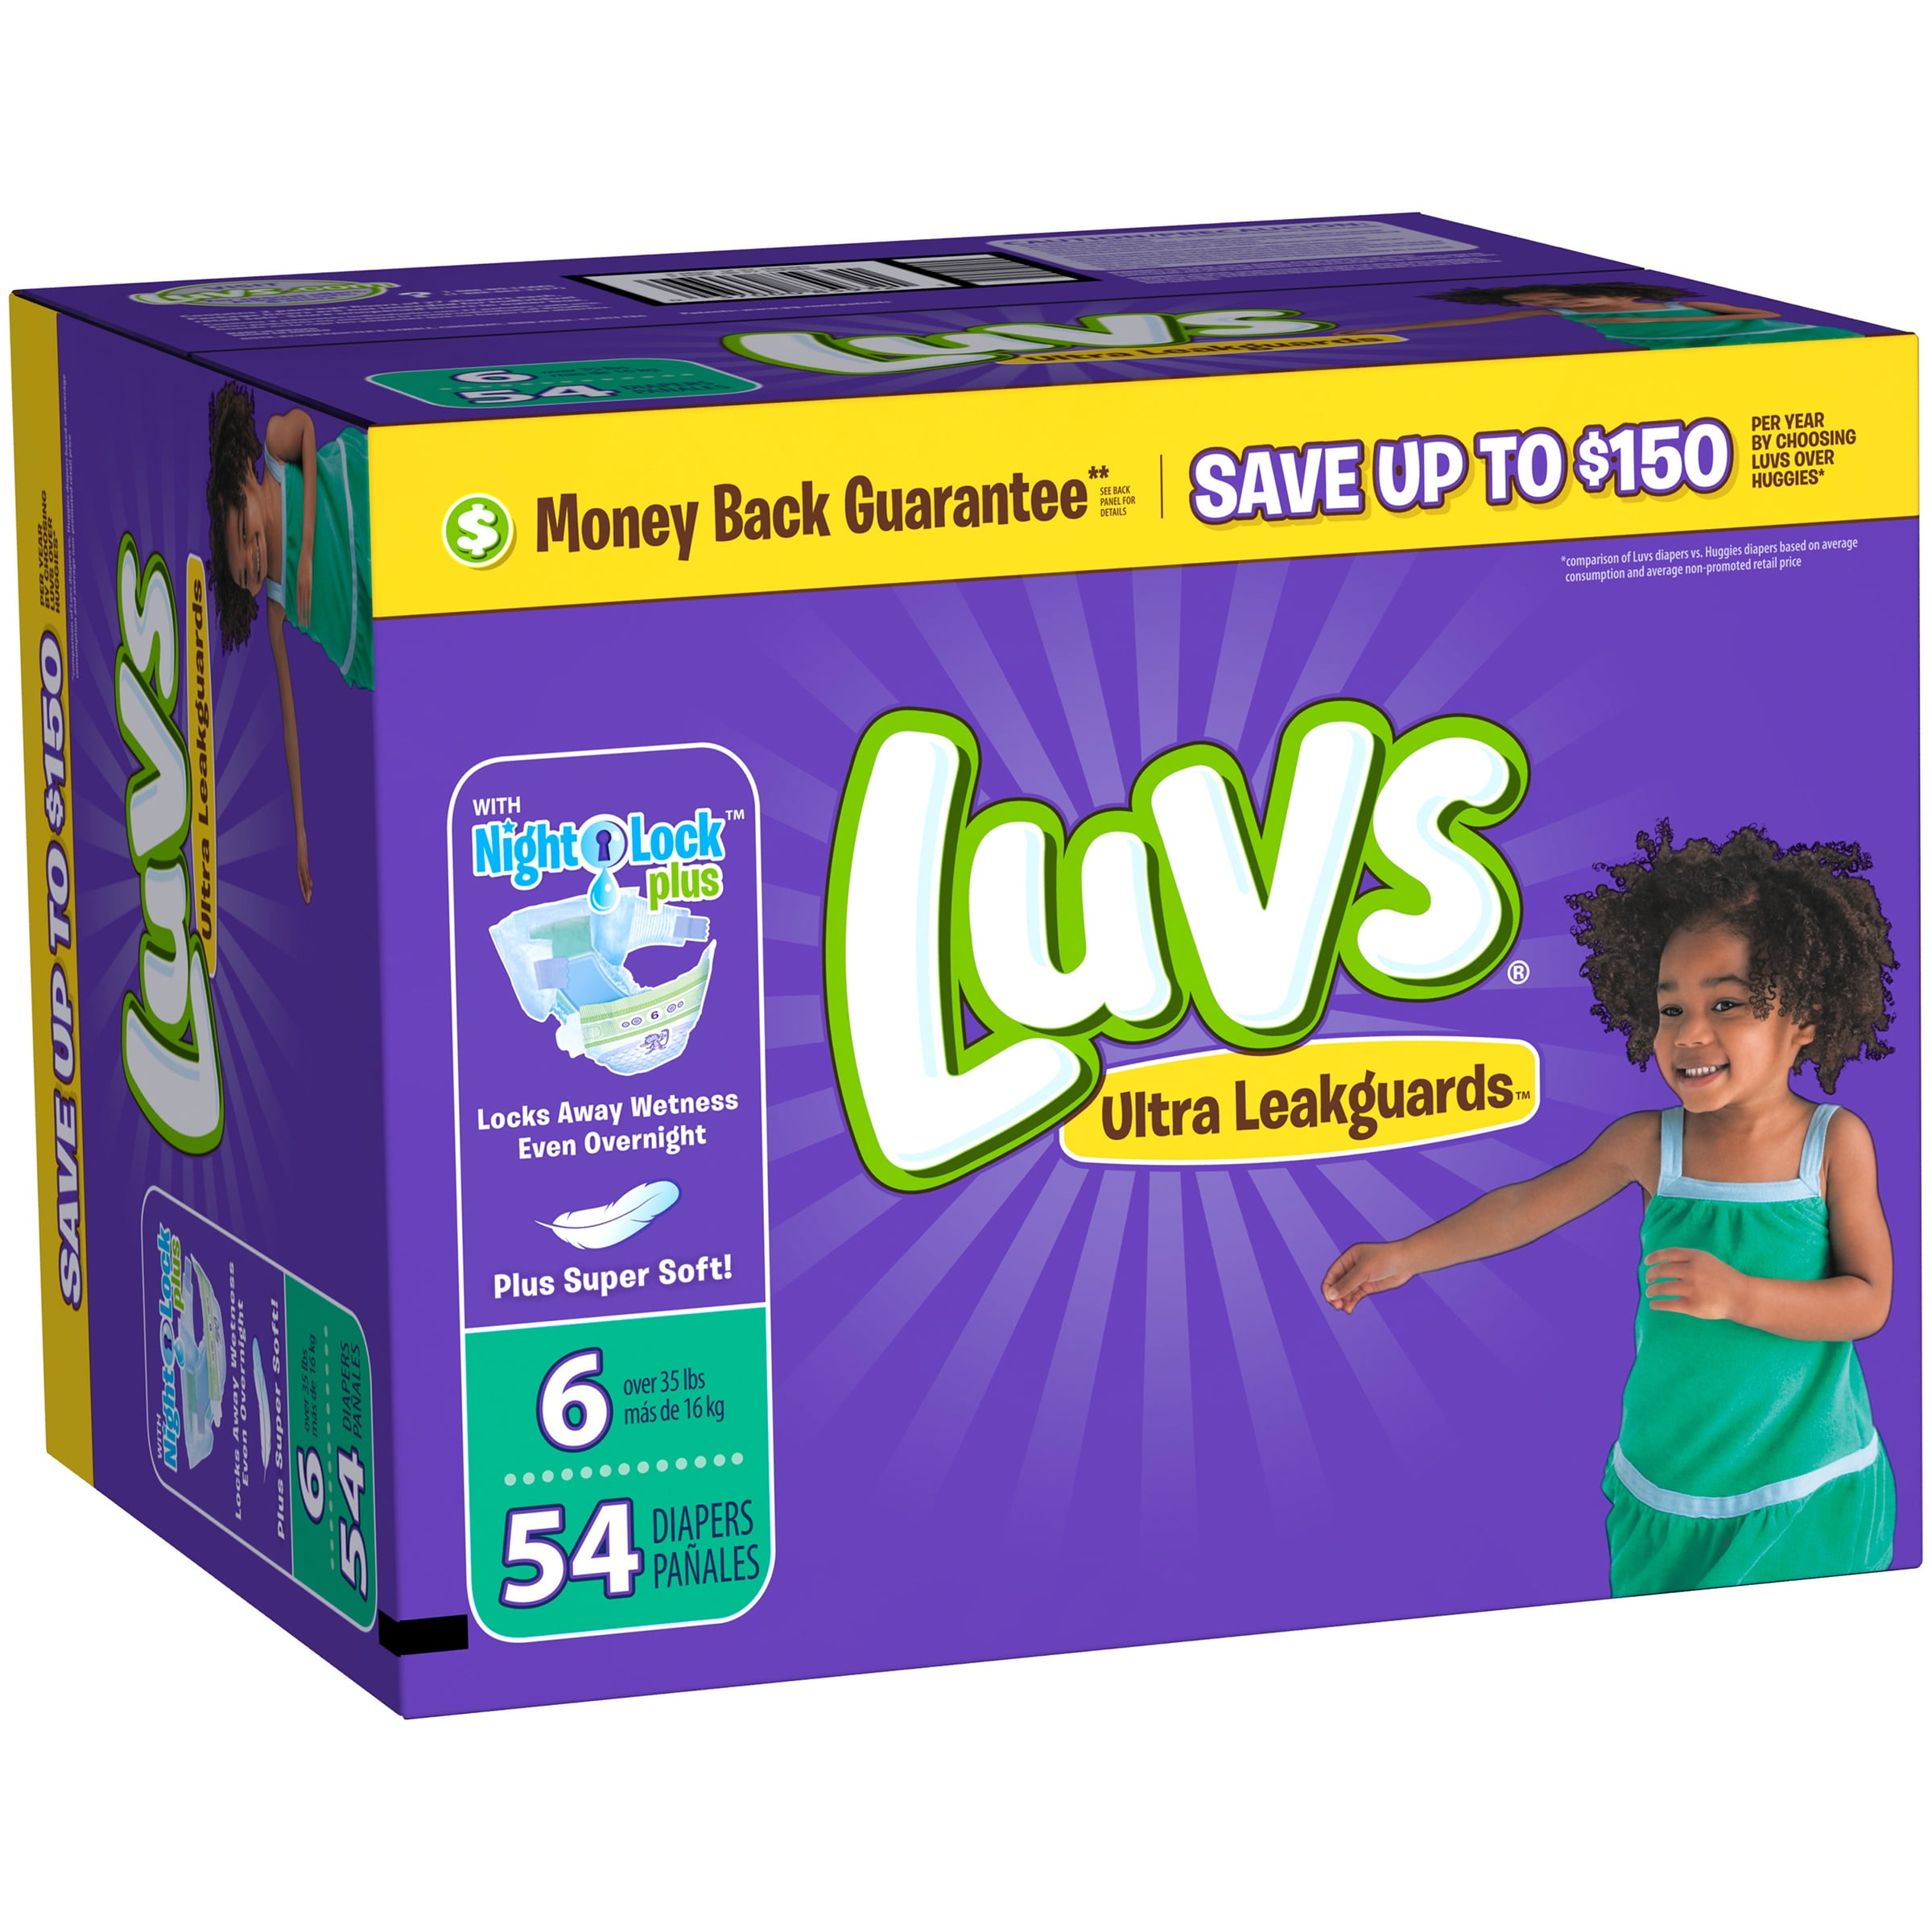 Pack of 4 Luvs Ultra Leakguards Diapers with Night Lock Size 3 34 ea 